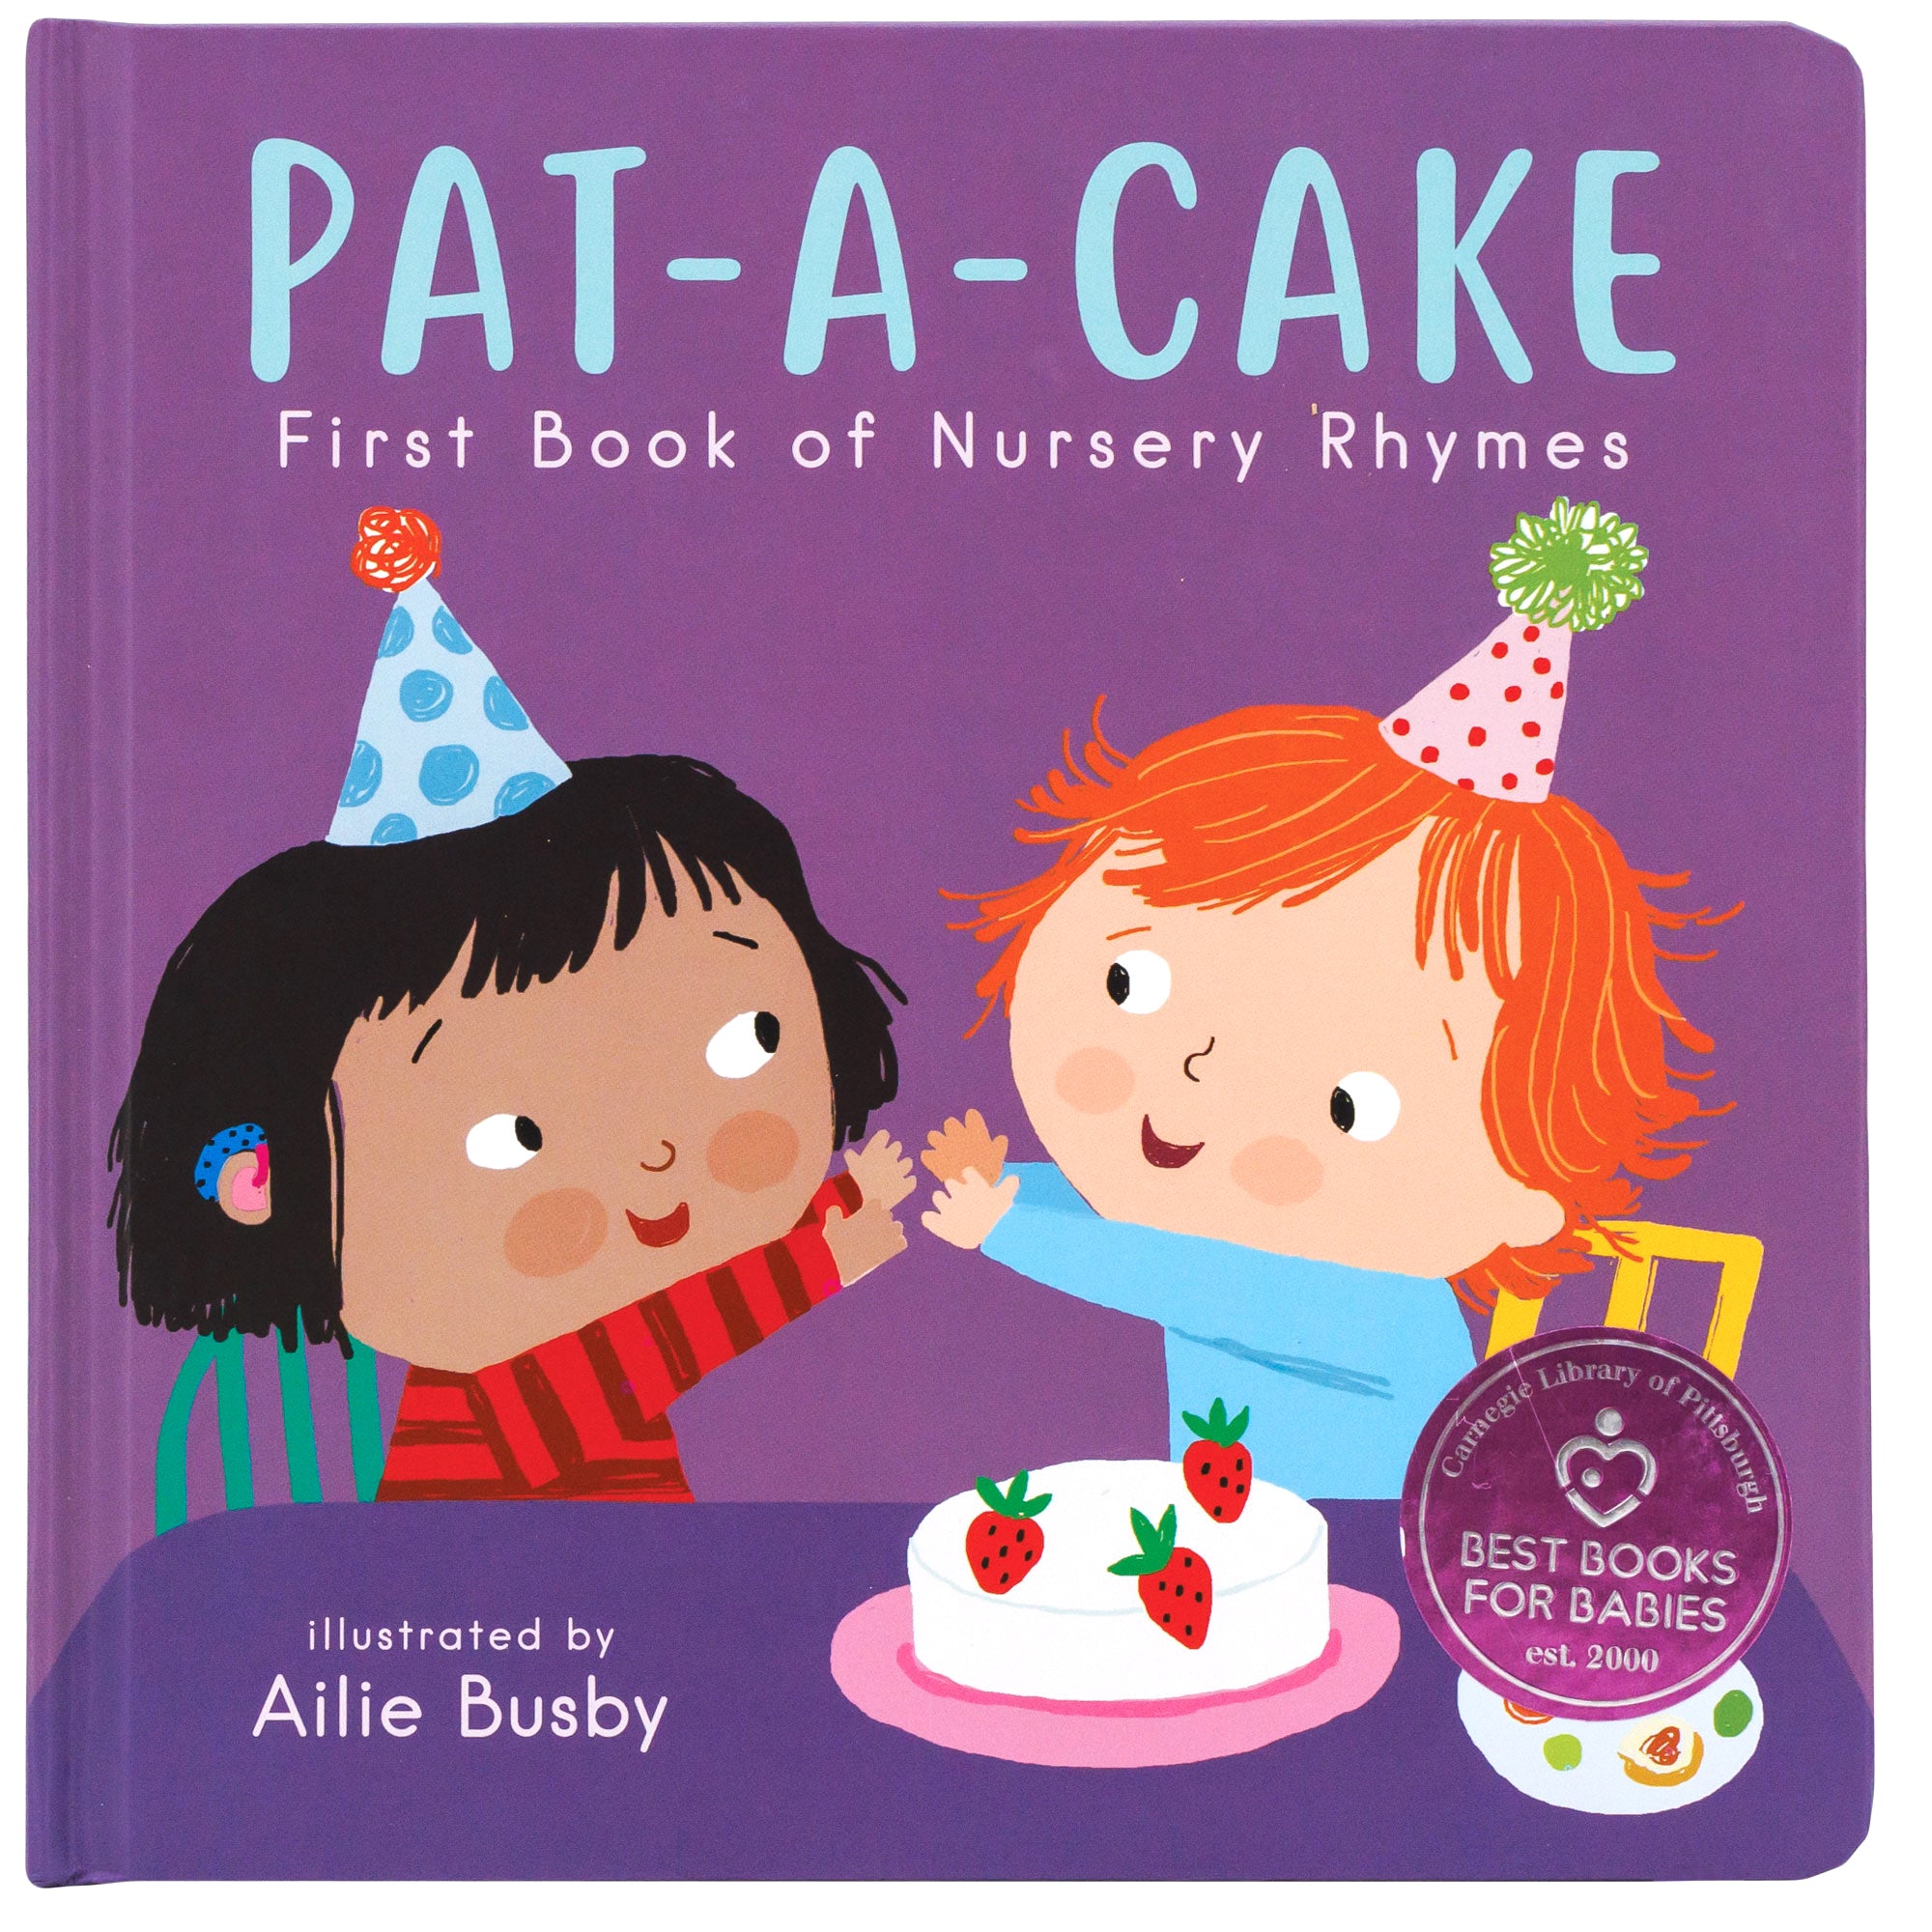 Pat a Cake Nursery Rhyme Poem and Activities by Almost Their Height